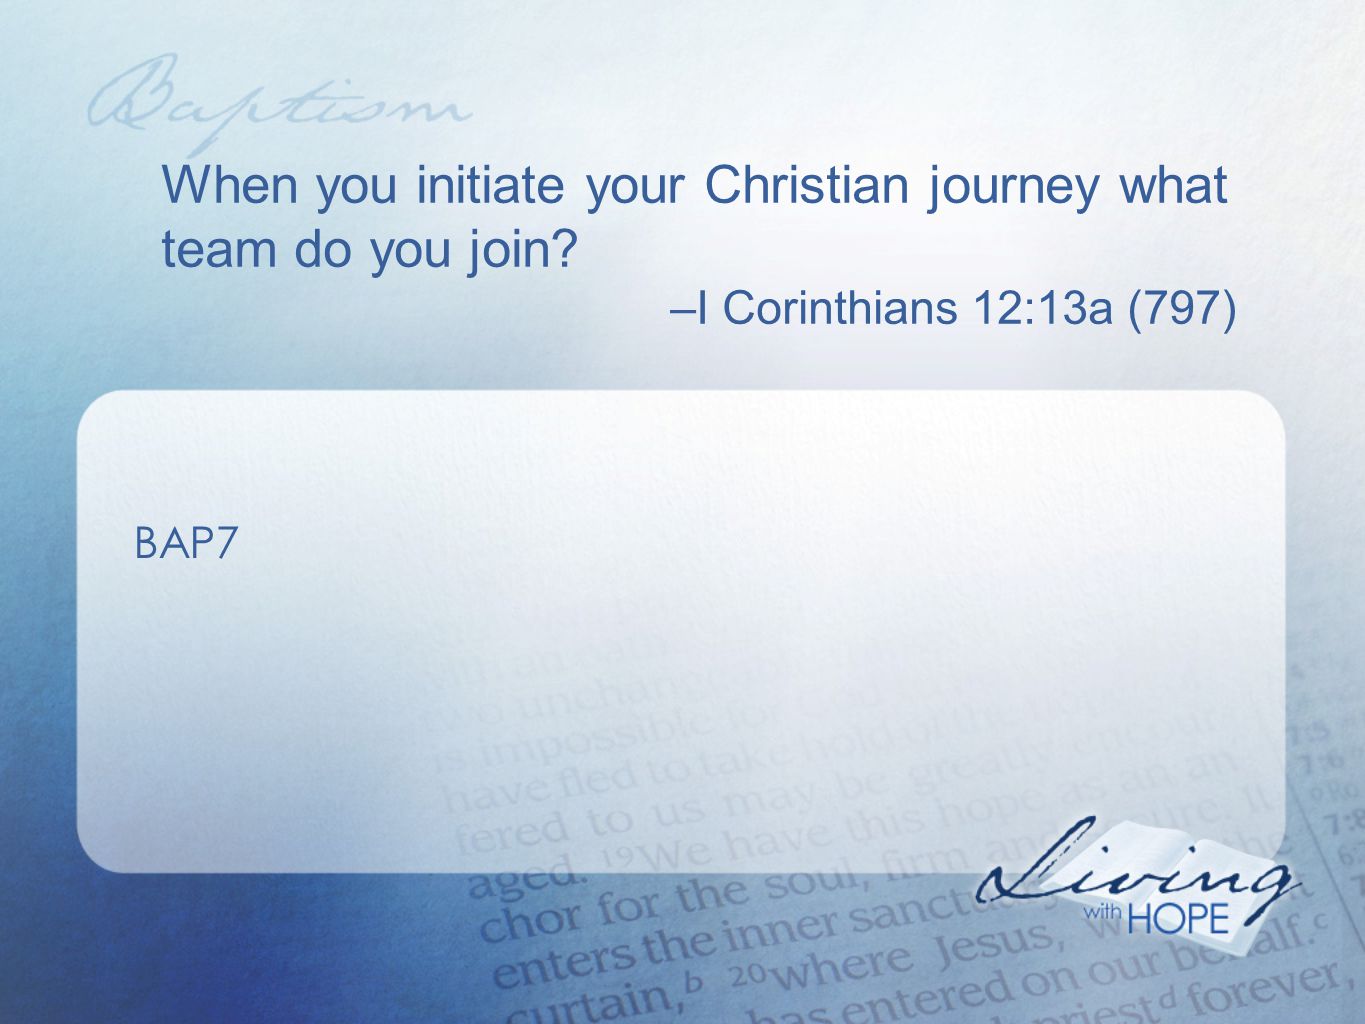 When you initiate your Christian journey what team do you join –I Corinthians 12:13a (797) BAP7